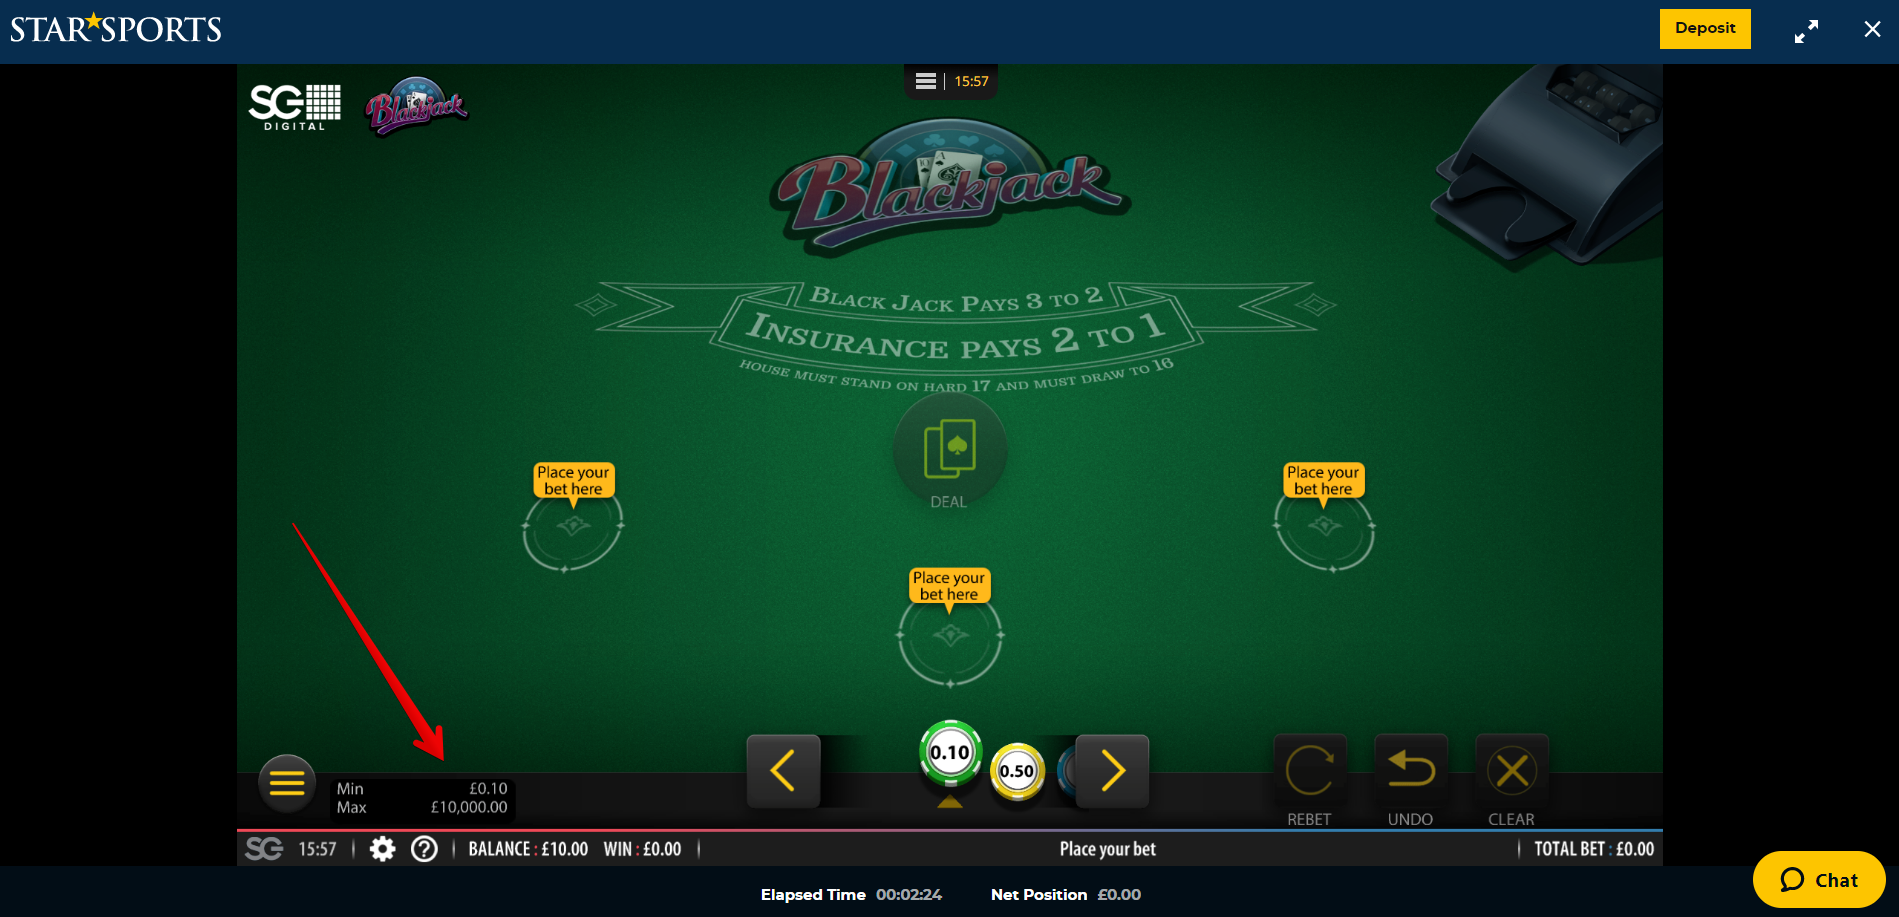 Blackjack at Star Sports CasinoStar Sports Casino Roulette review